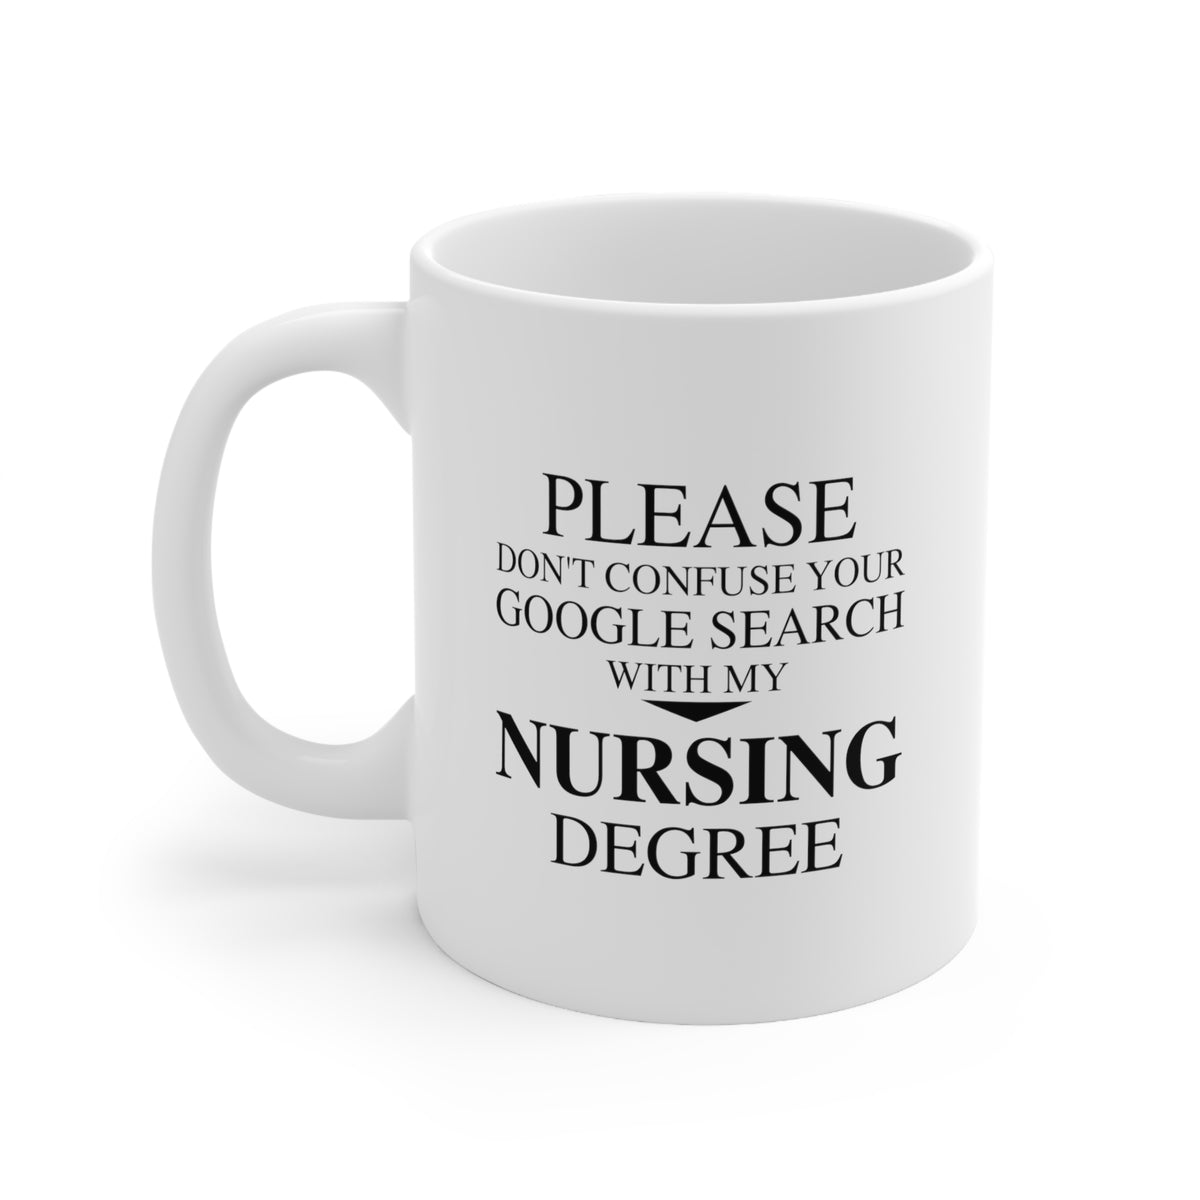 Fun Nurse Coffee Mug - Please don't confuse your Google Search with my Nursing Degree Cup - Funny Birthday Christmas Unique Gifts For Practitioner Retirement, Men, Women, Friends, Coworkers